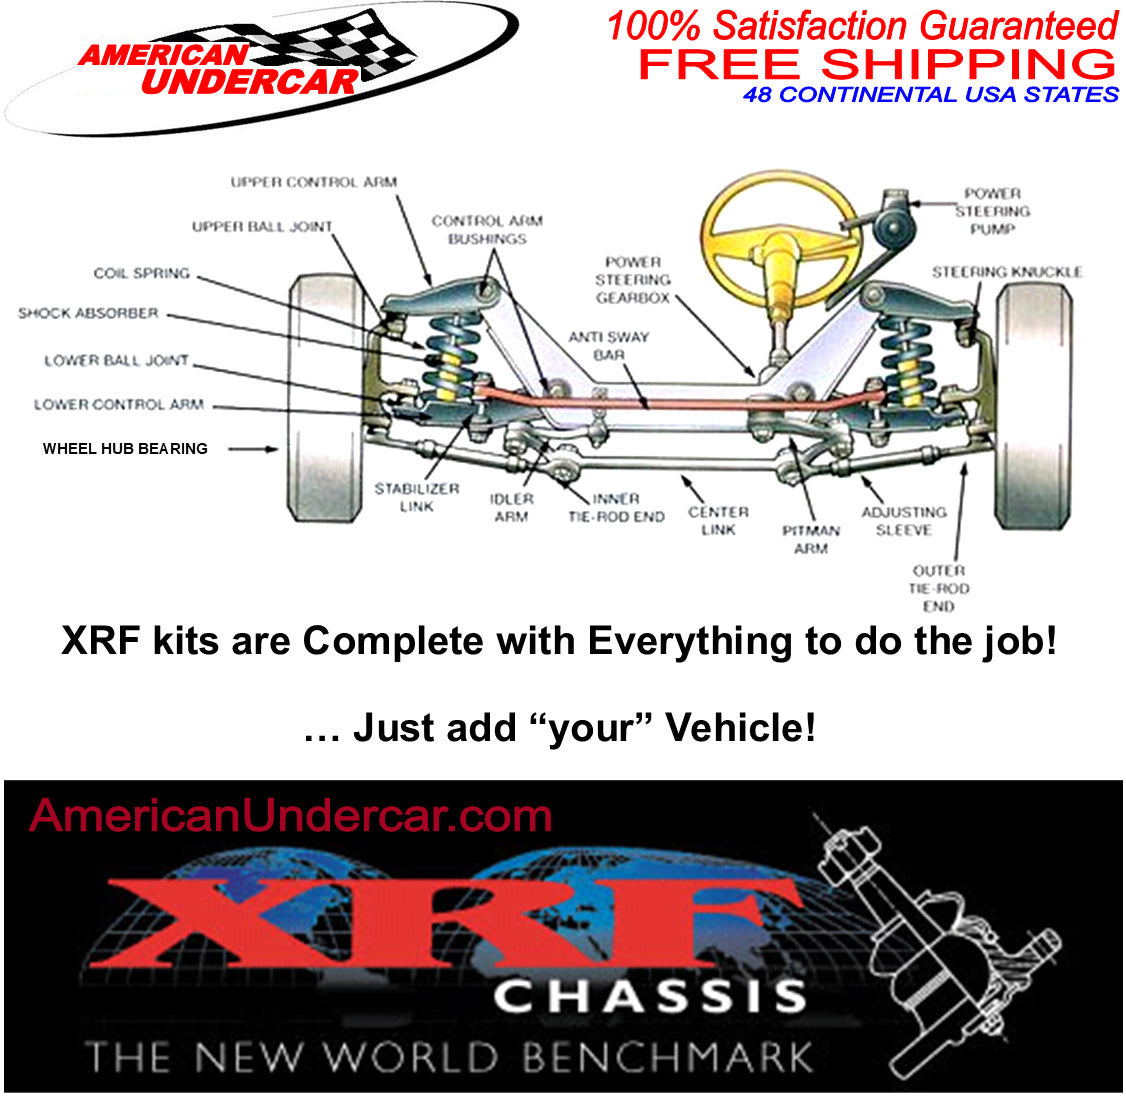 XRF Jeep Wrangler Ball Joint Upper and Lower Suspension Kit 2007 - 2017